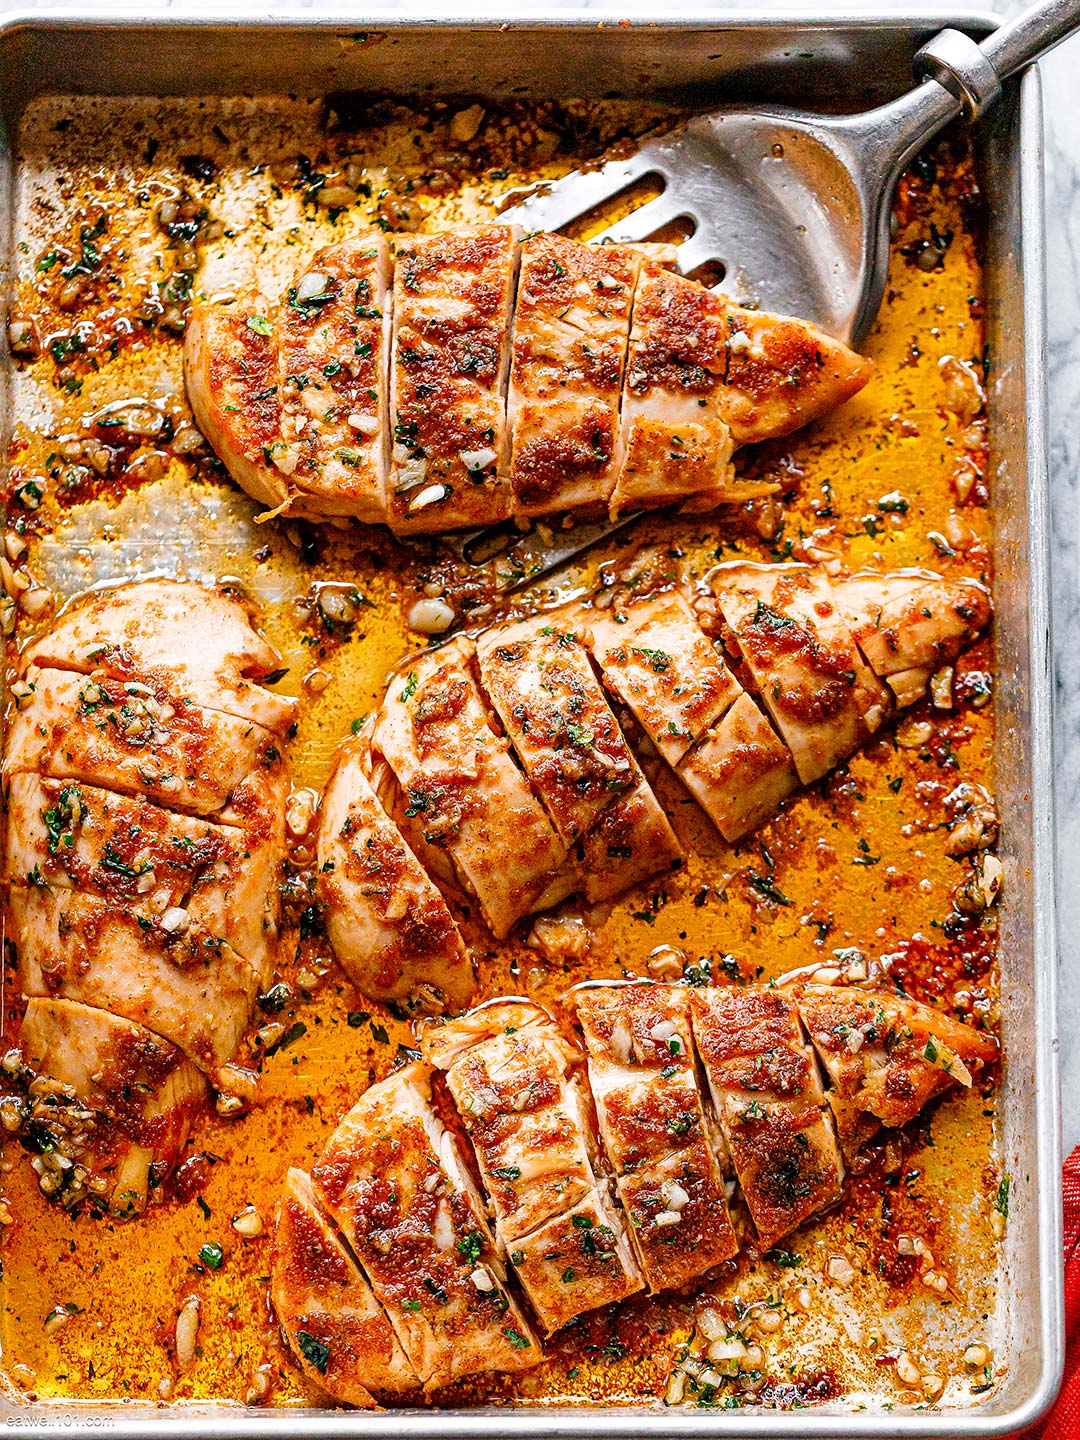 Juicy Oven-Baked Chicken Breasts Recipe – How to Bake Chicken Breasts ...